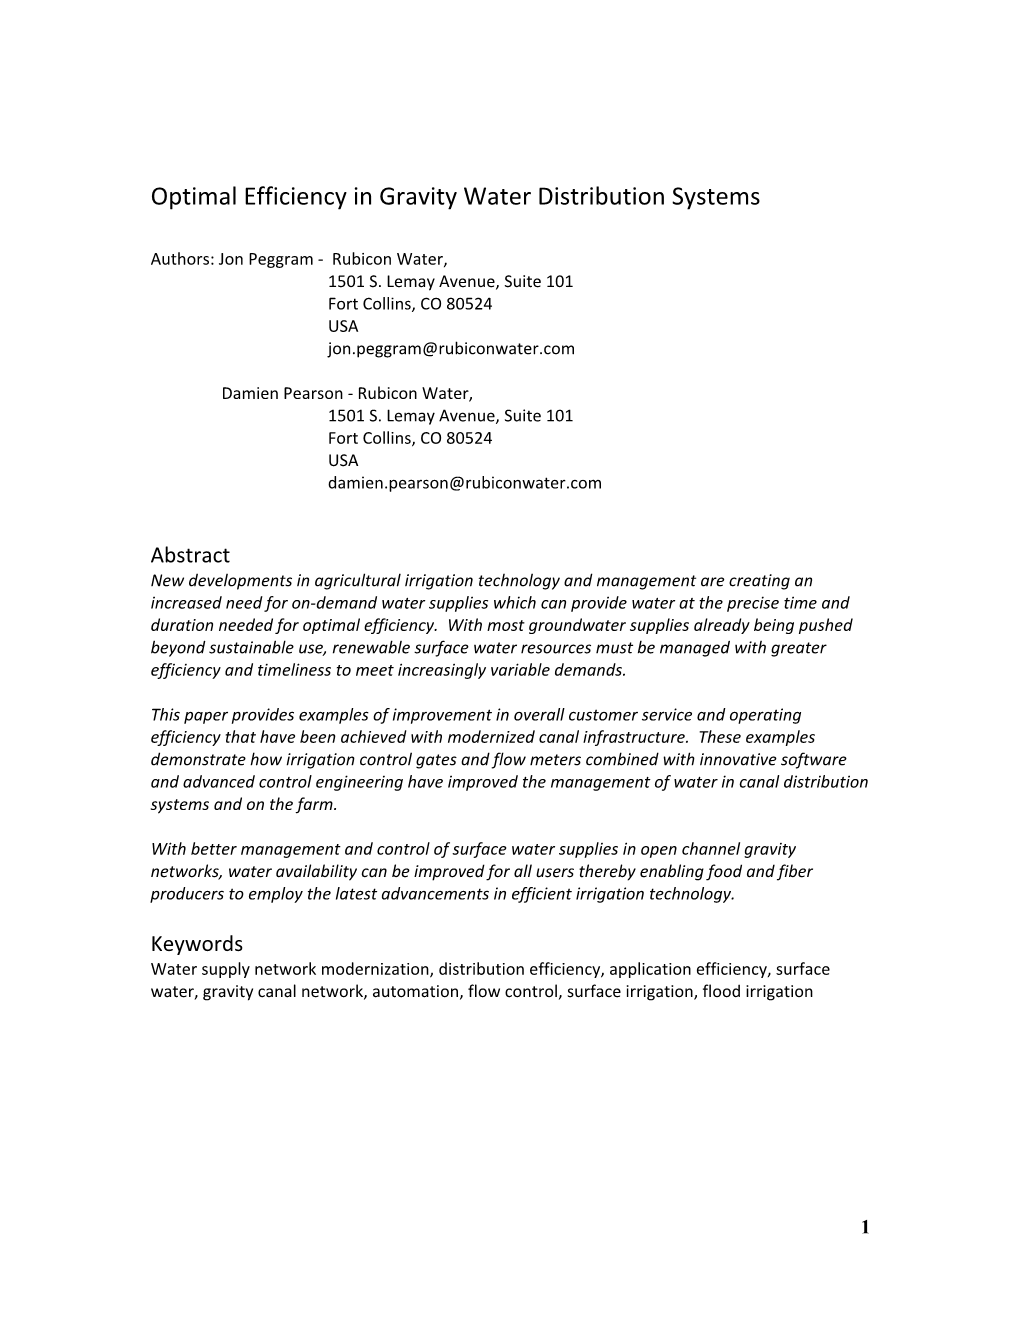 Optimal Efficiency in Gravity Water Distribution Systems